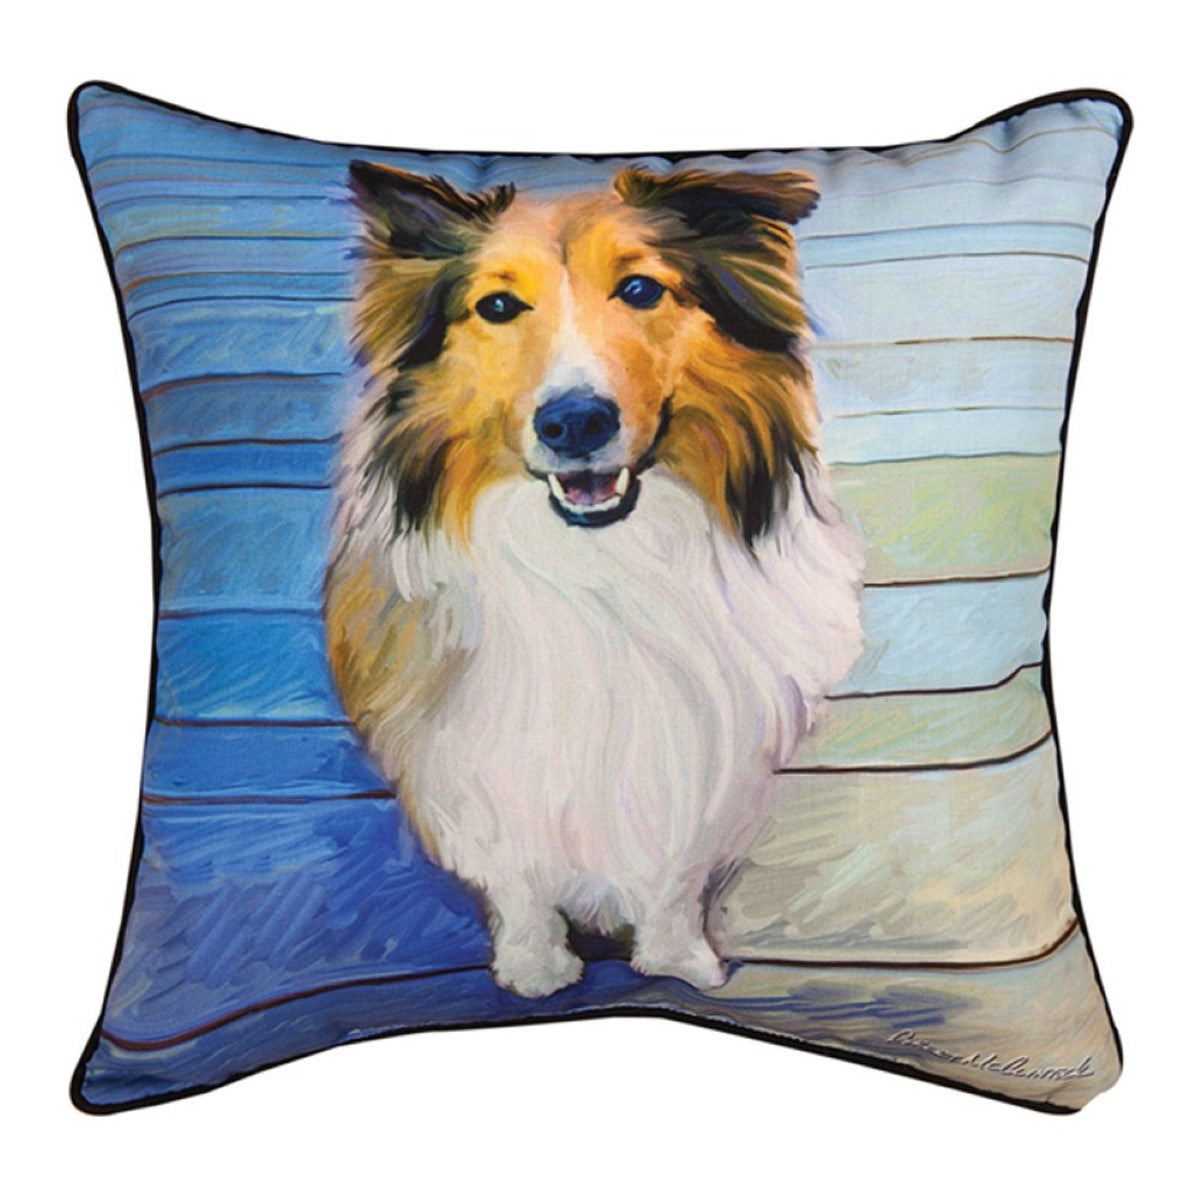 Sheltie The Eyes Have It Pillows By Robert McClintock